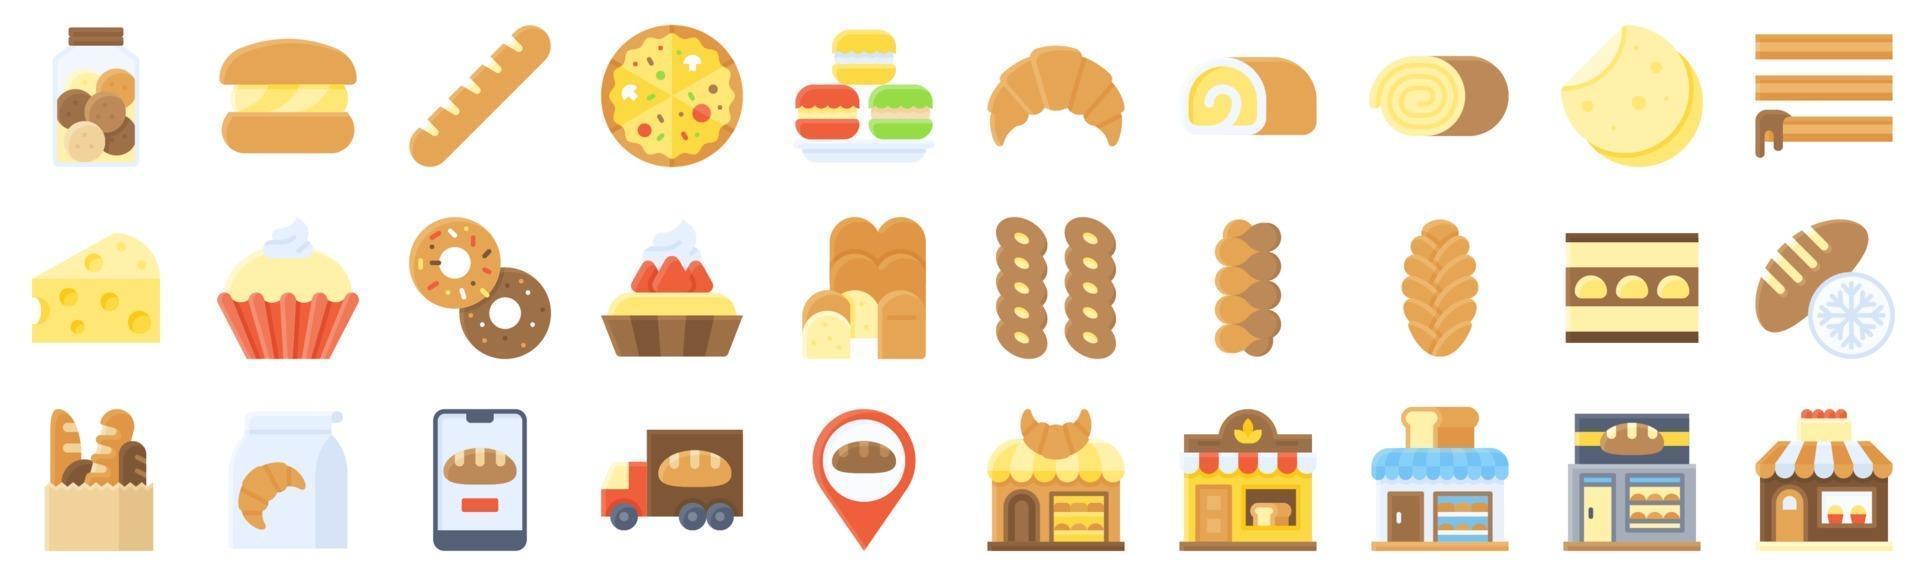 Bakery and baking related flat icon set 5 vector